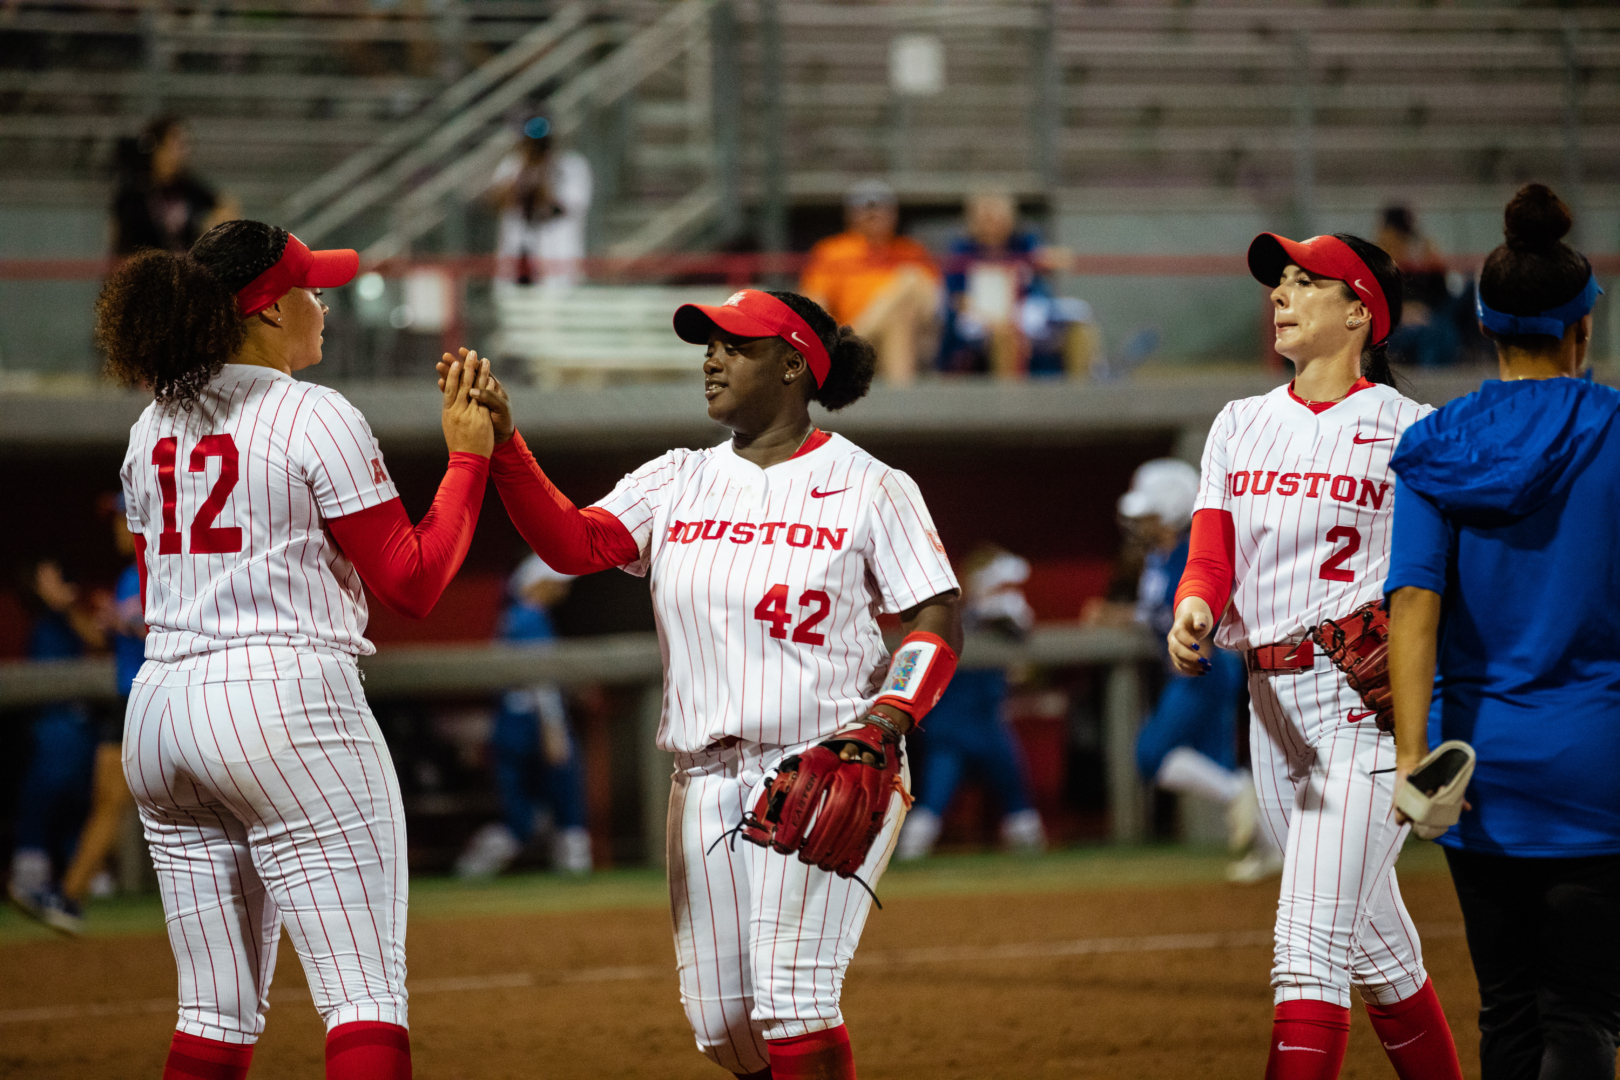 UH softball improved to 15-16 on the season after sweeping Memphis over the weekend. | Oscar Herrera/The Cougar